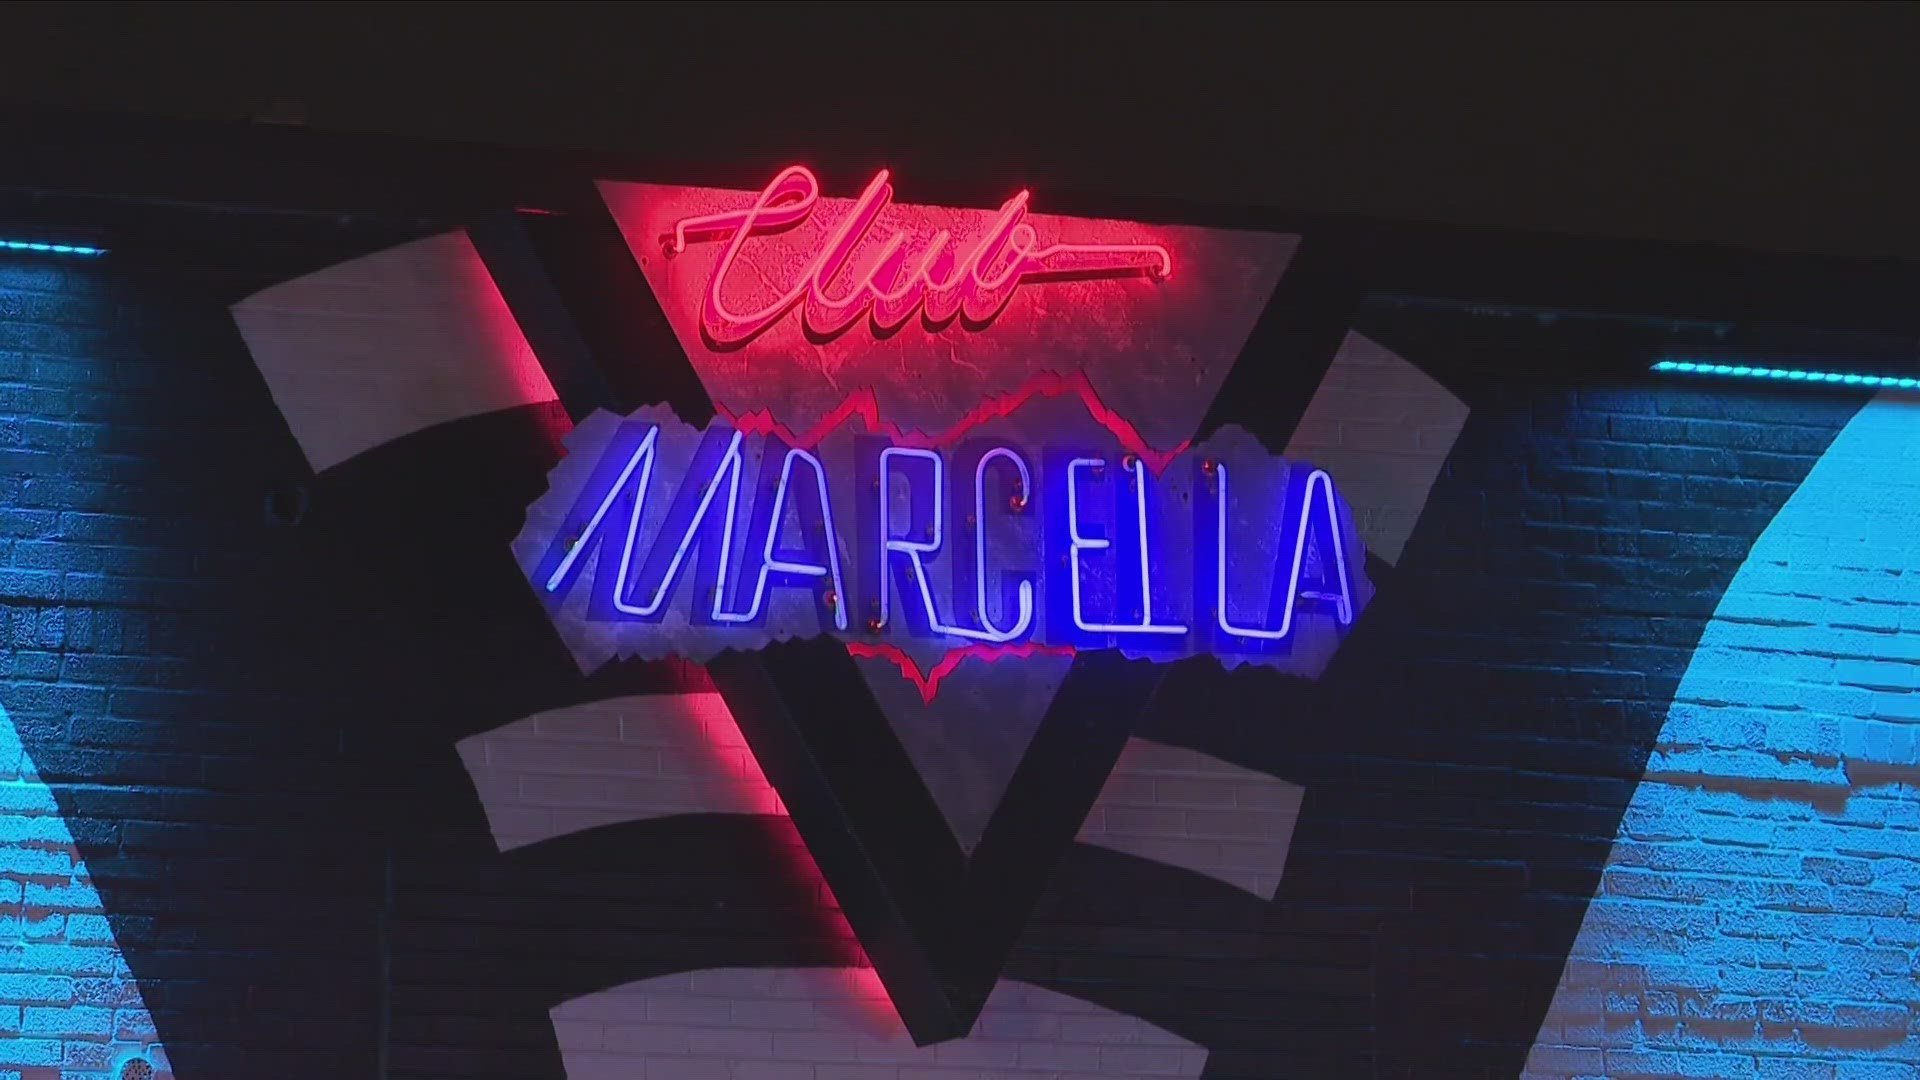 Police said a 30-year-old man was shot inside a bathroom at Club Marcella early Sunday morning.